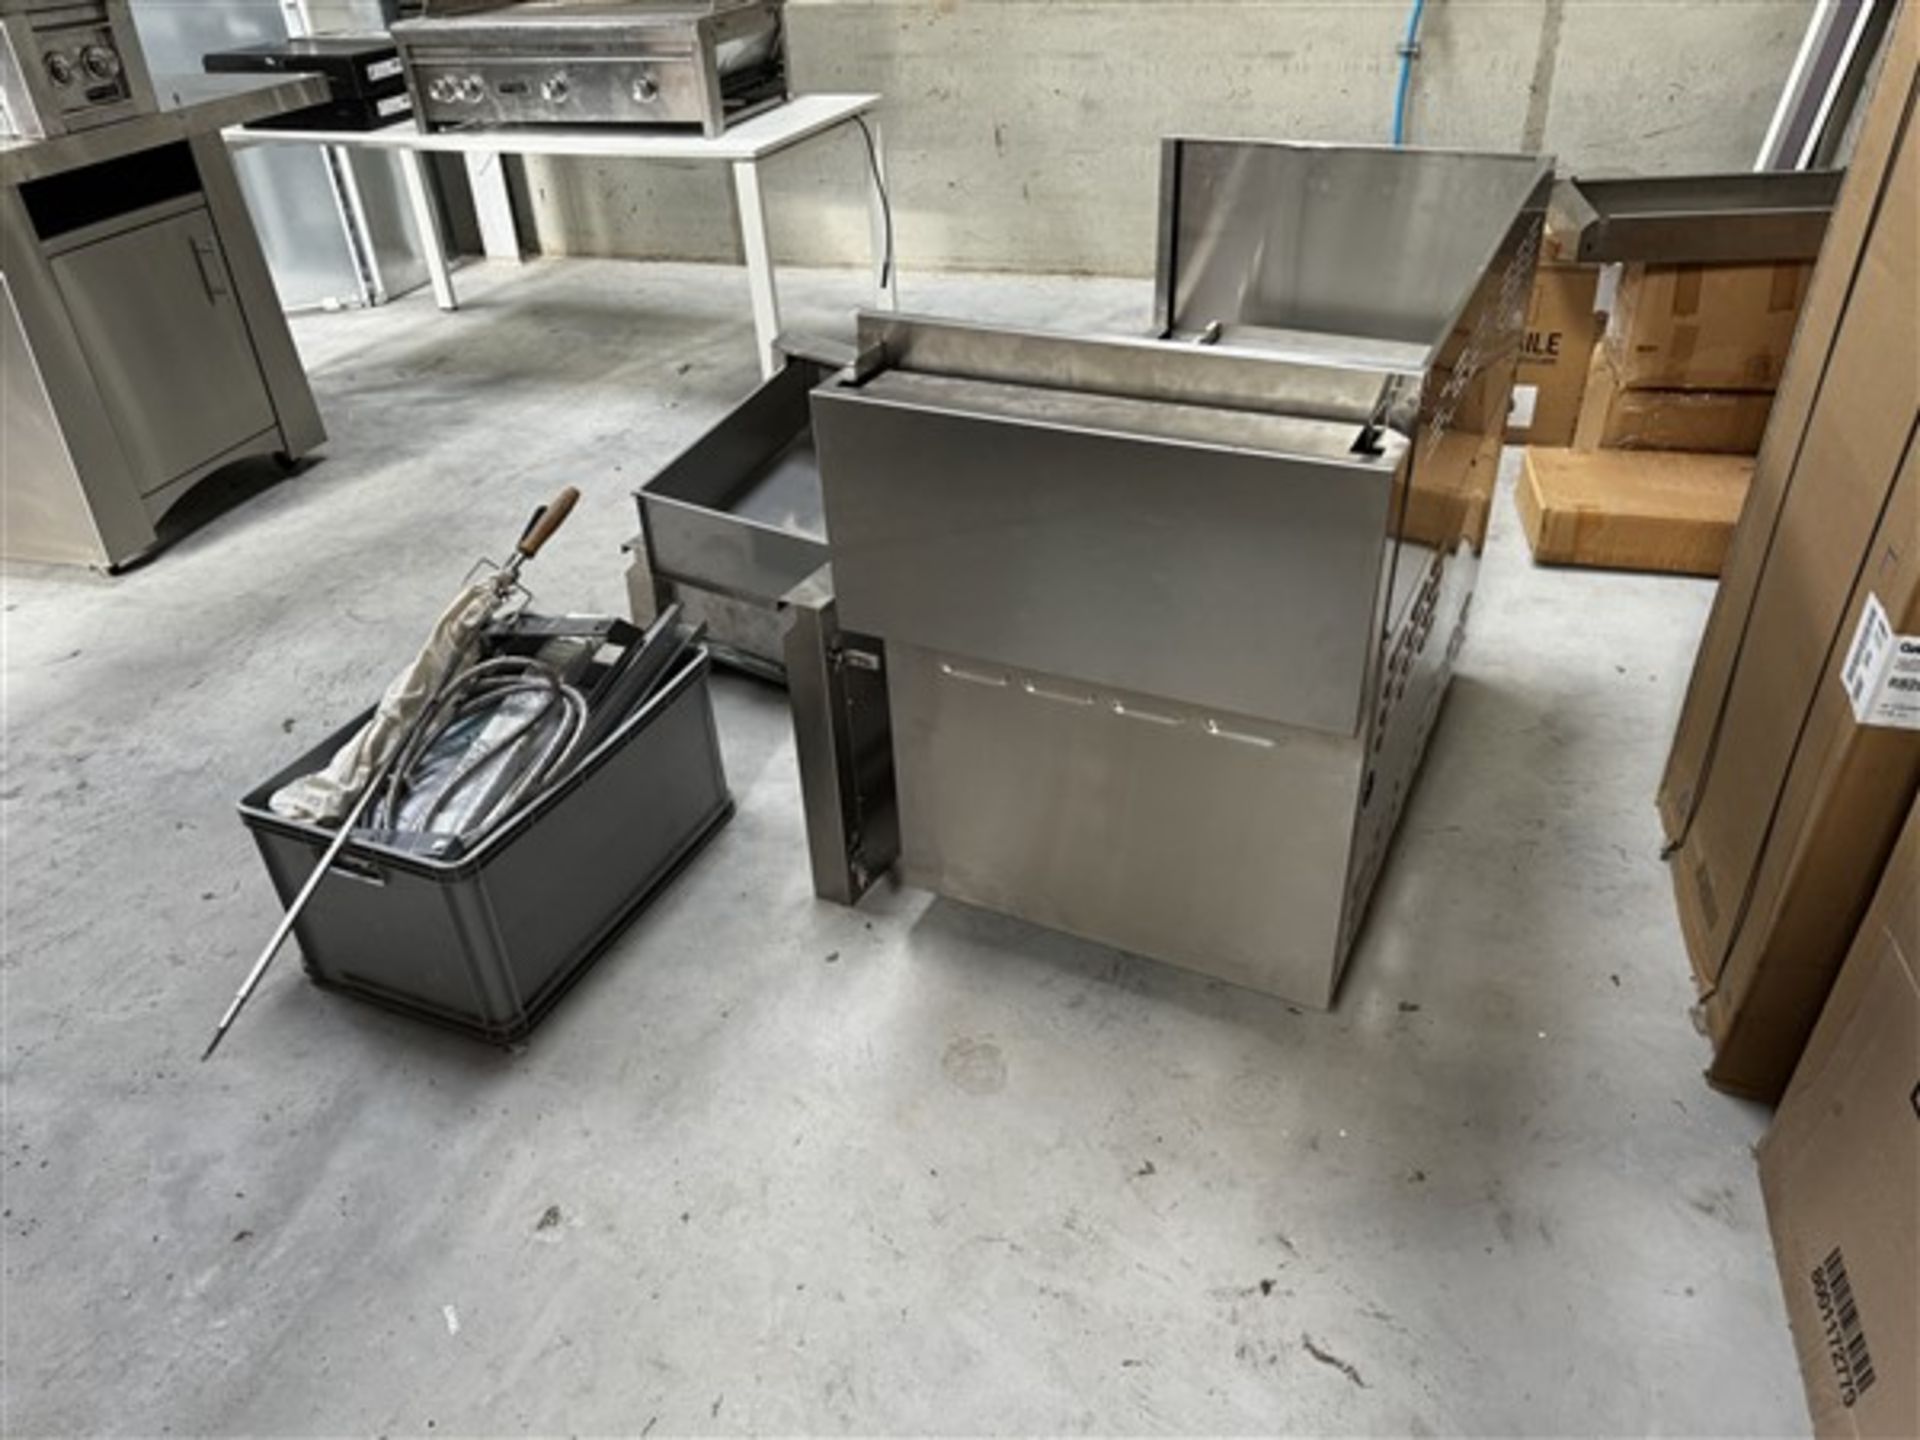 Stainless steel BBQ counter with two shelves/drawers counter dimensions: height 94cm x length 1.3m x - Image 3 of 4